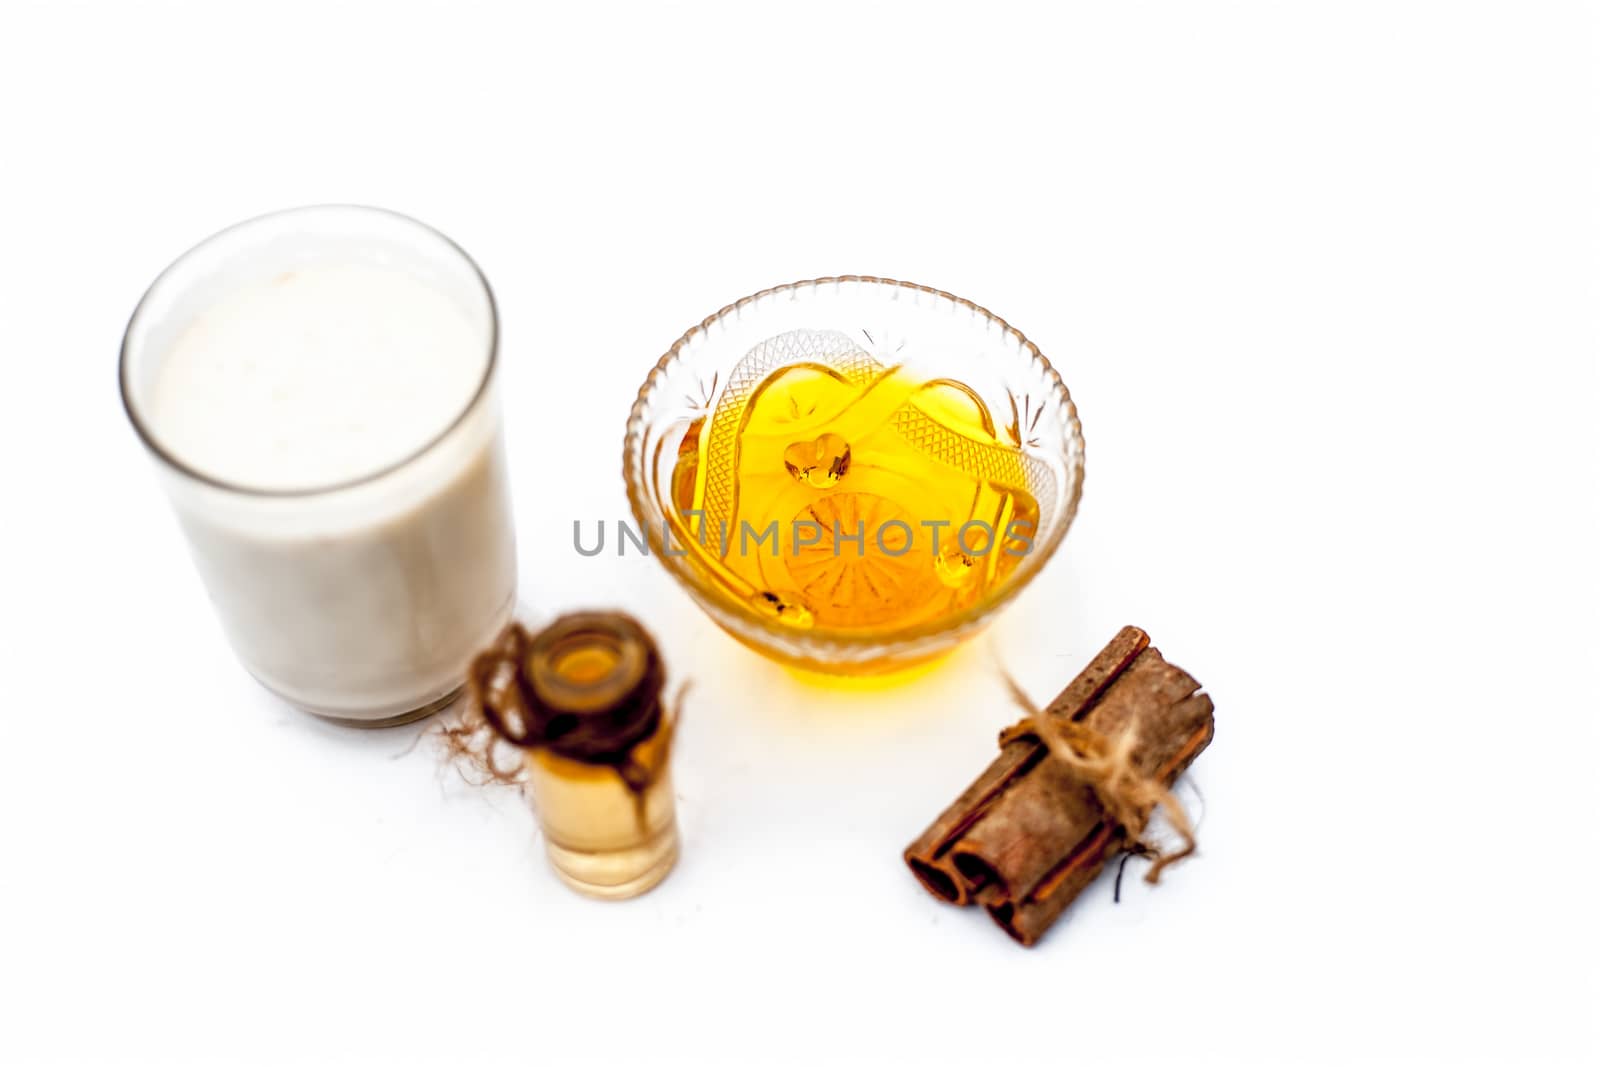 Close up of popular Indian &amp; Asian winter drink isolated on white i.e Honey milk or shahad ka dudh in a transparent glass with entire ingredients which are milk,honey, and dry fruits. by mirzamlk